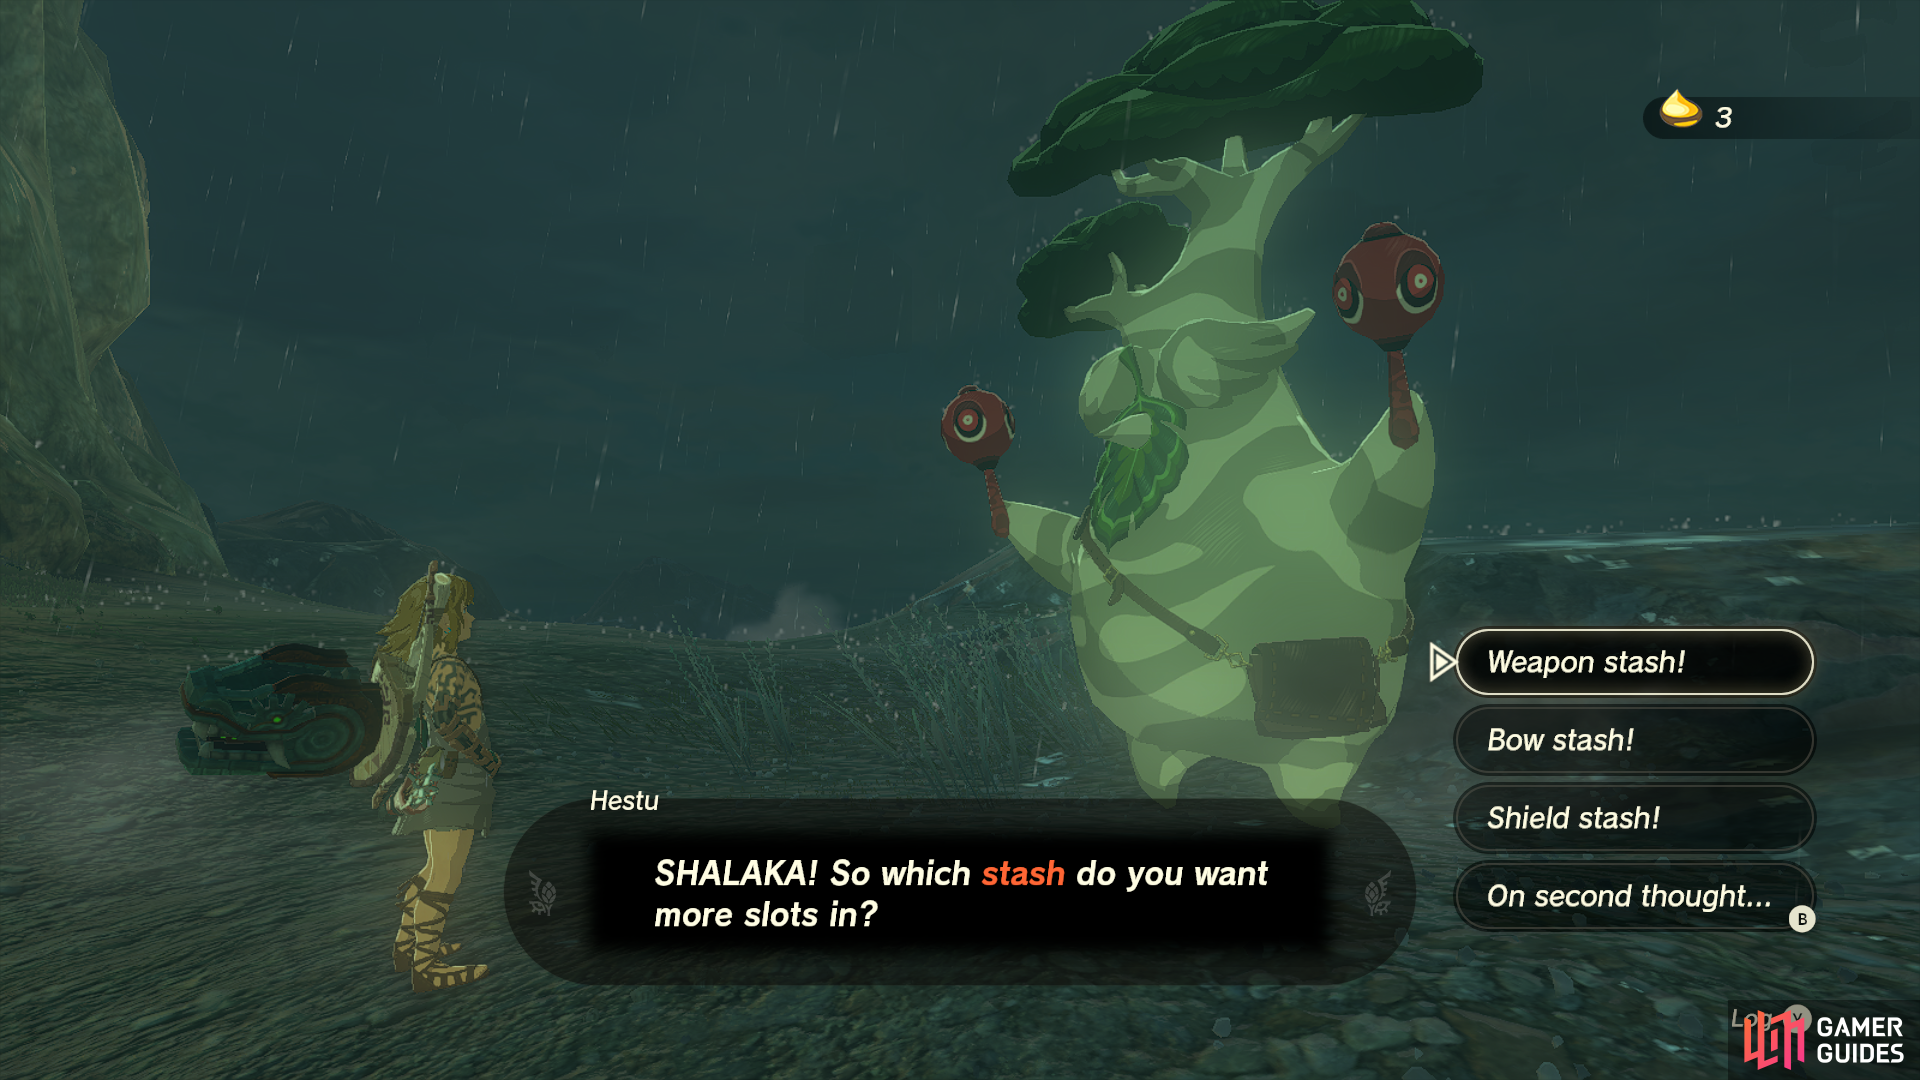 You can increase your inventory stash by one for a single Korok Seed.